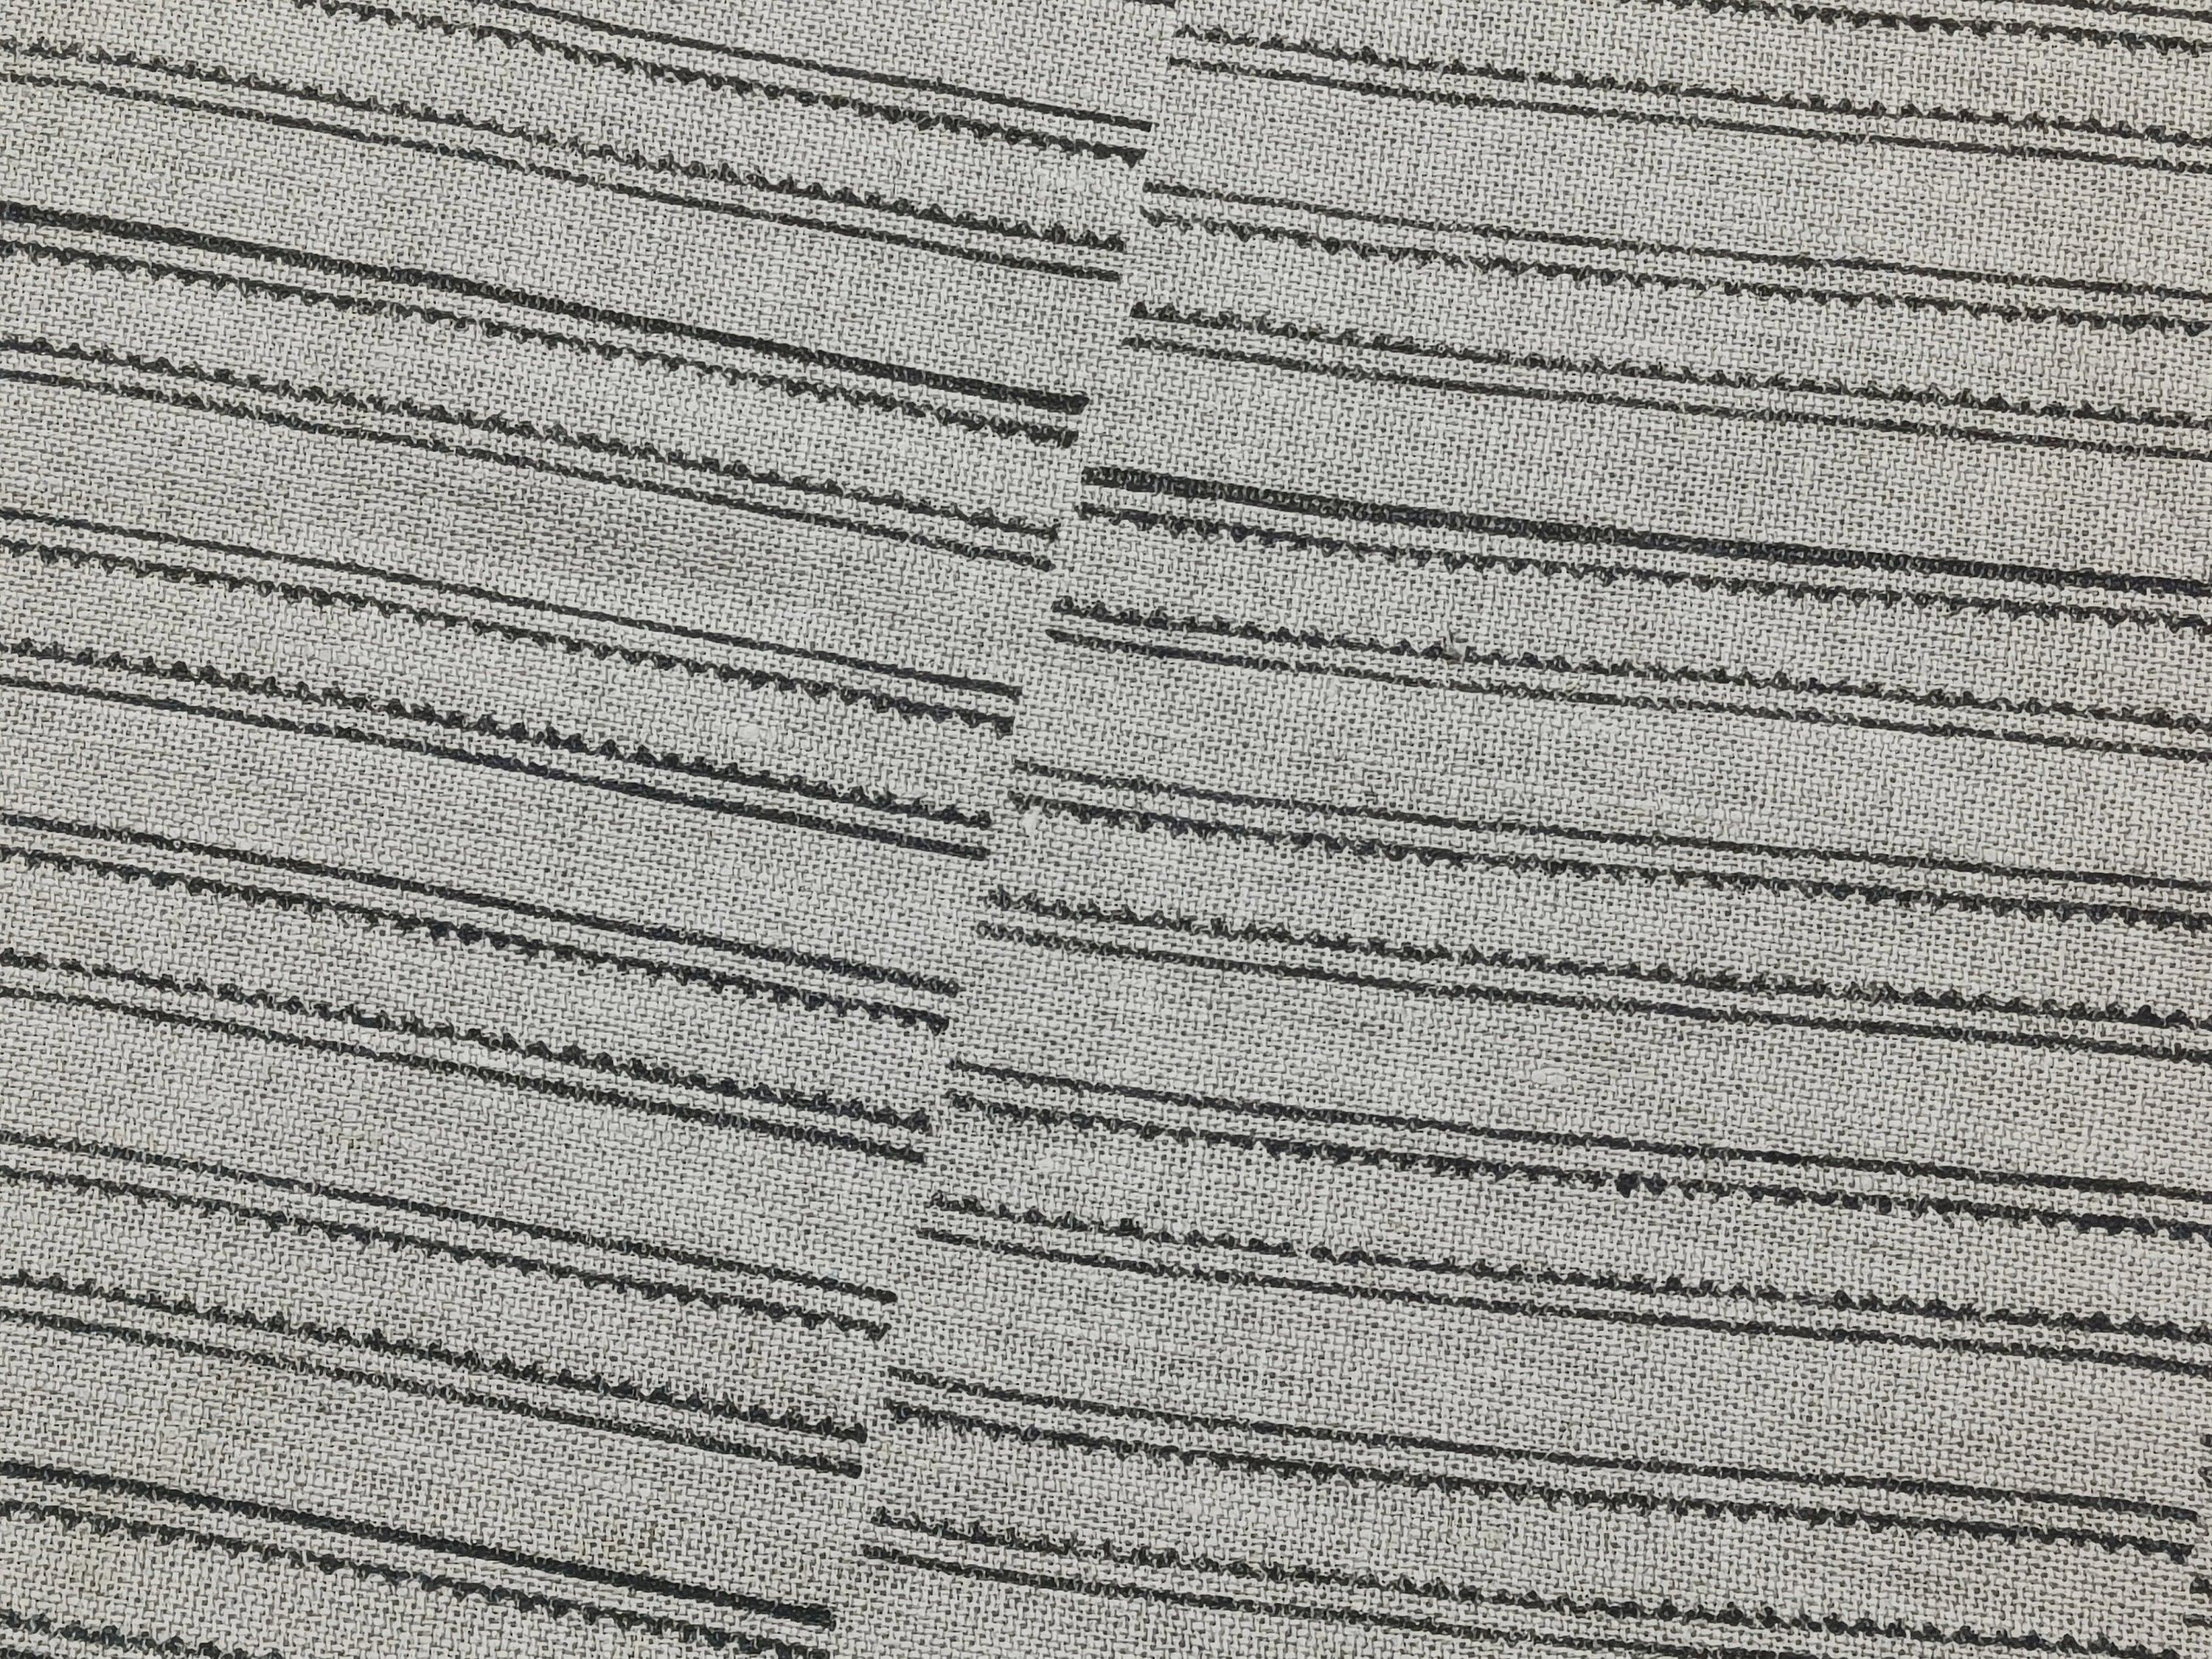 Close-up shot of BAIKUNTH's monochrome striped material